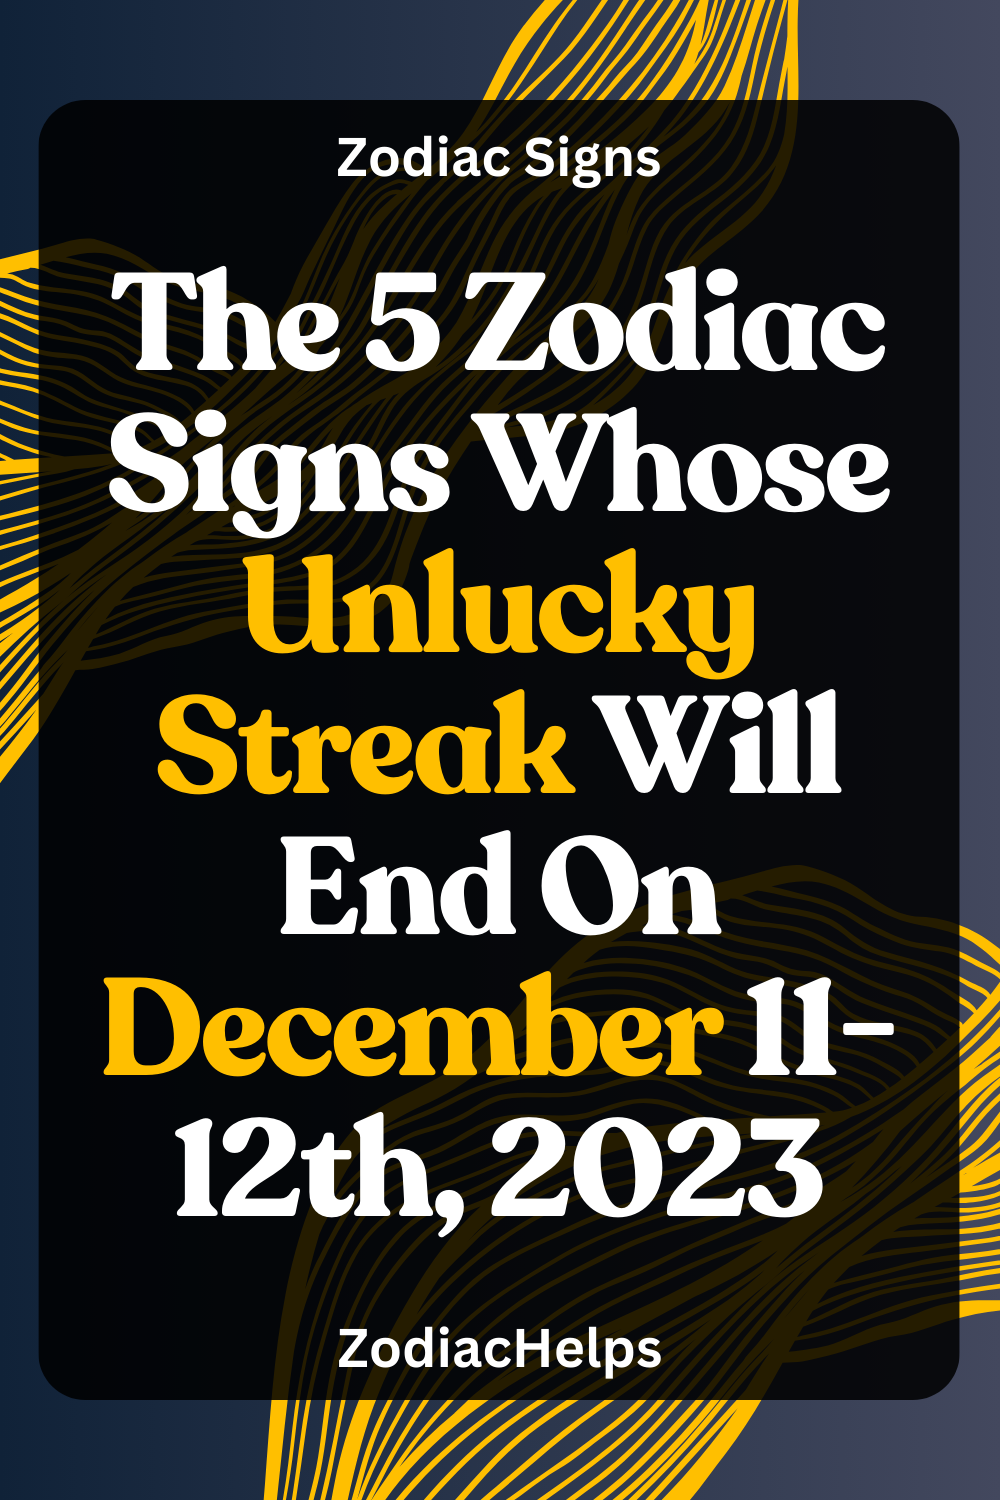 The 5 Zodiac Signs Whose Unlucky Streak Will End On December 11-12th, 2023